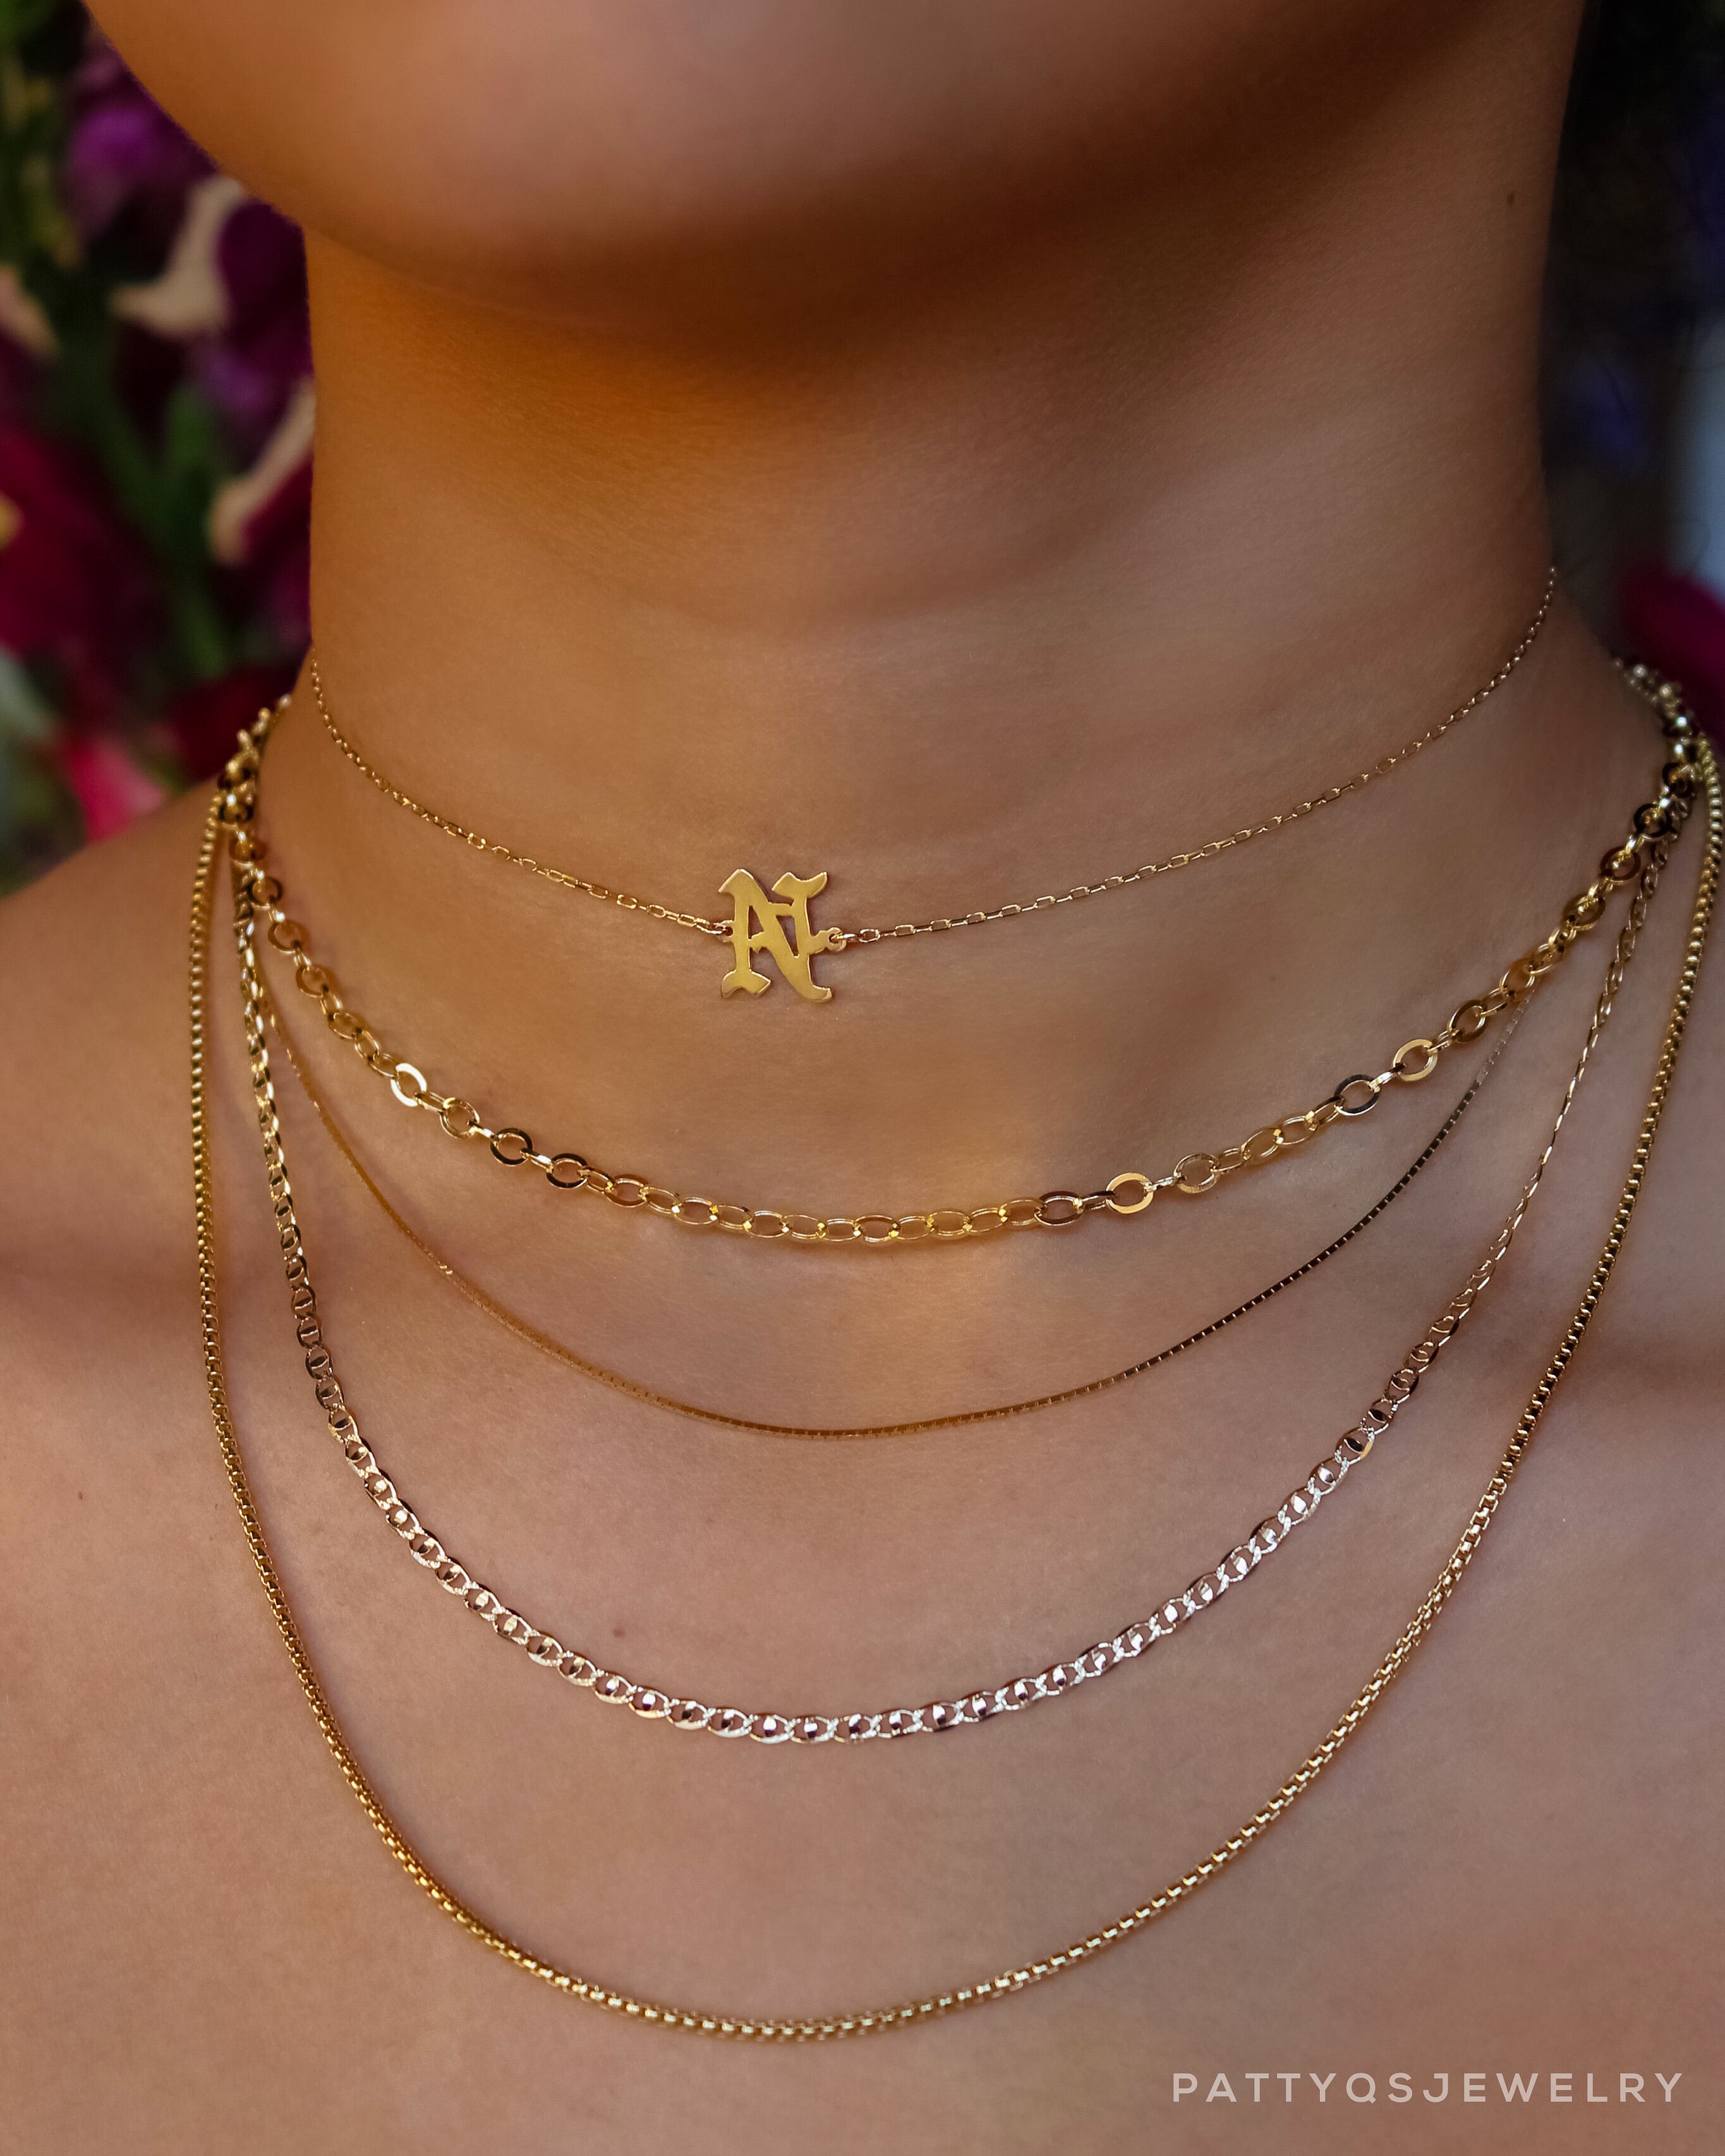 14K YELLOW GOLD FLOATING OLD ENGLISH INITIAL NECKLACE